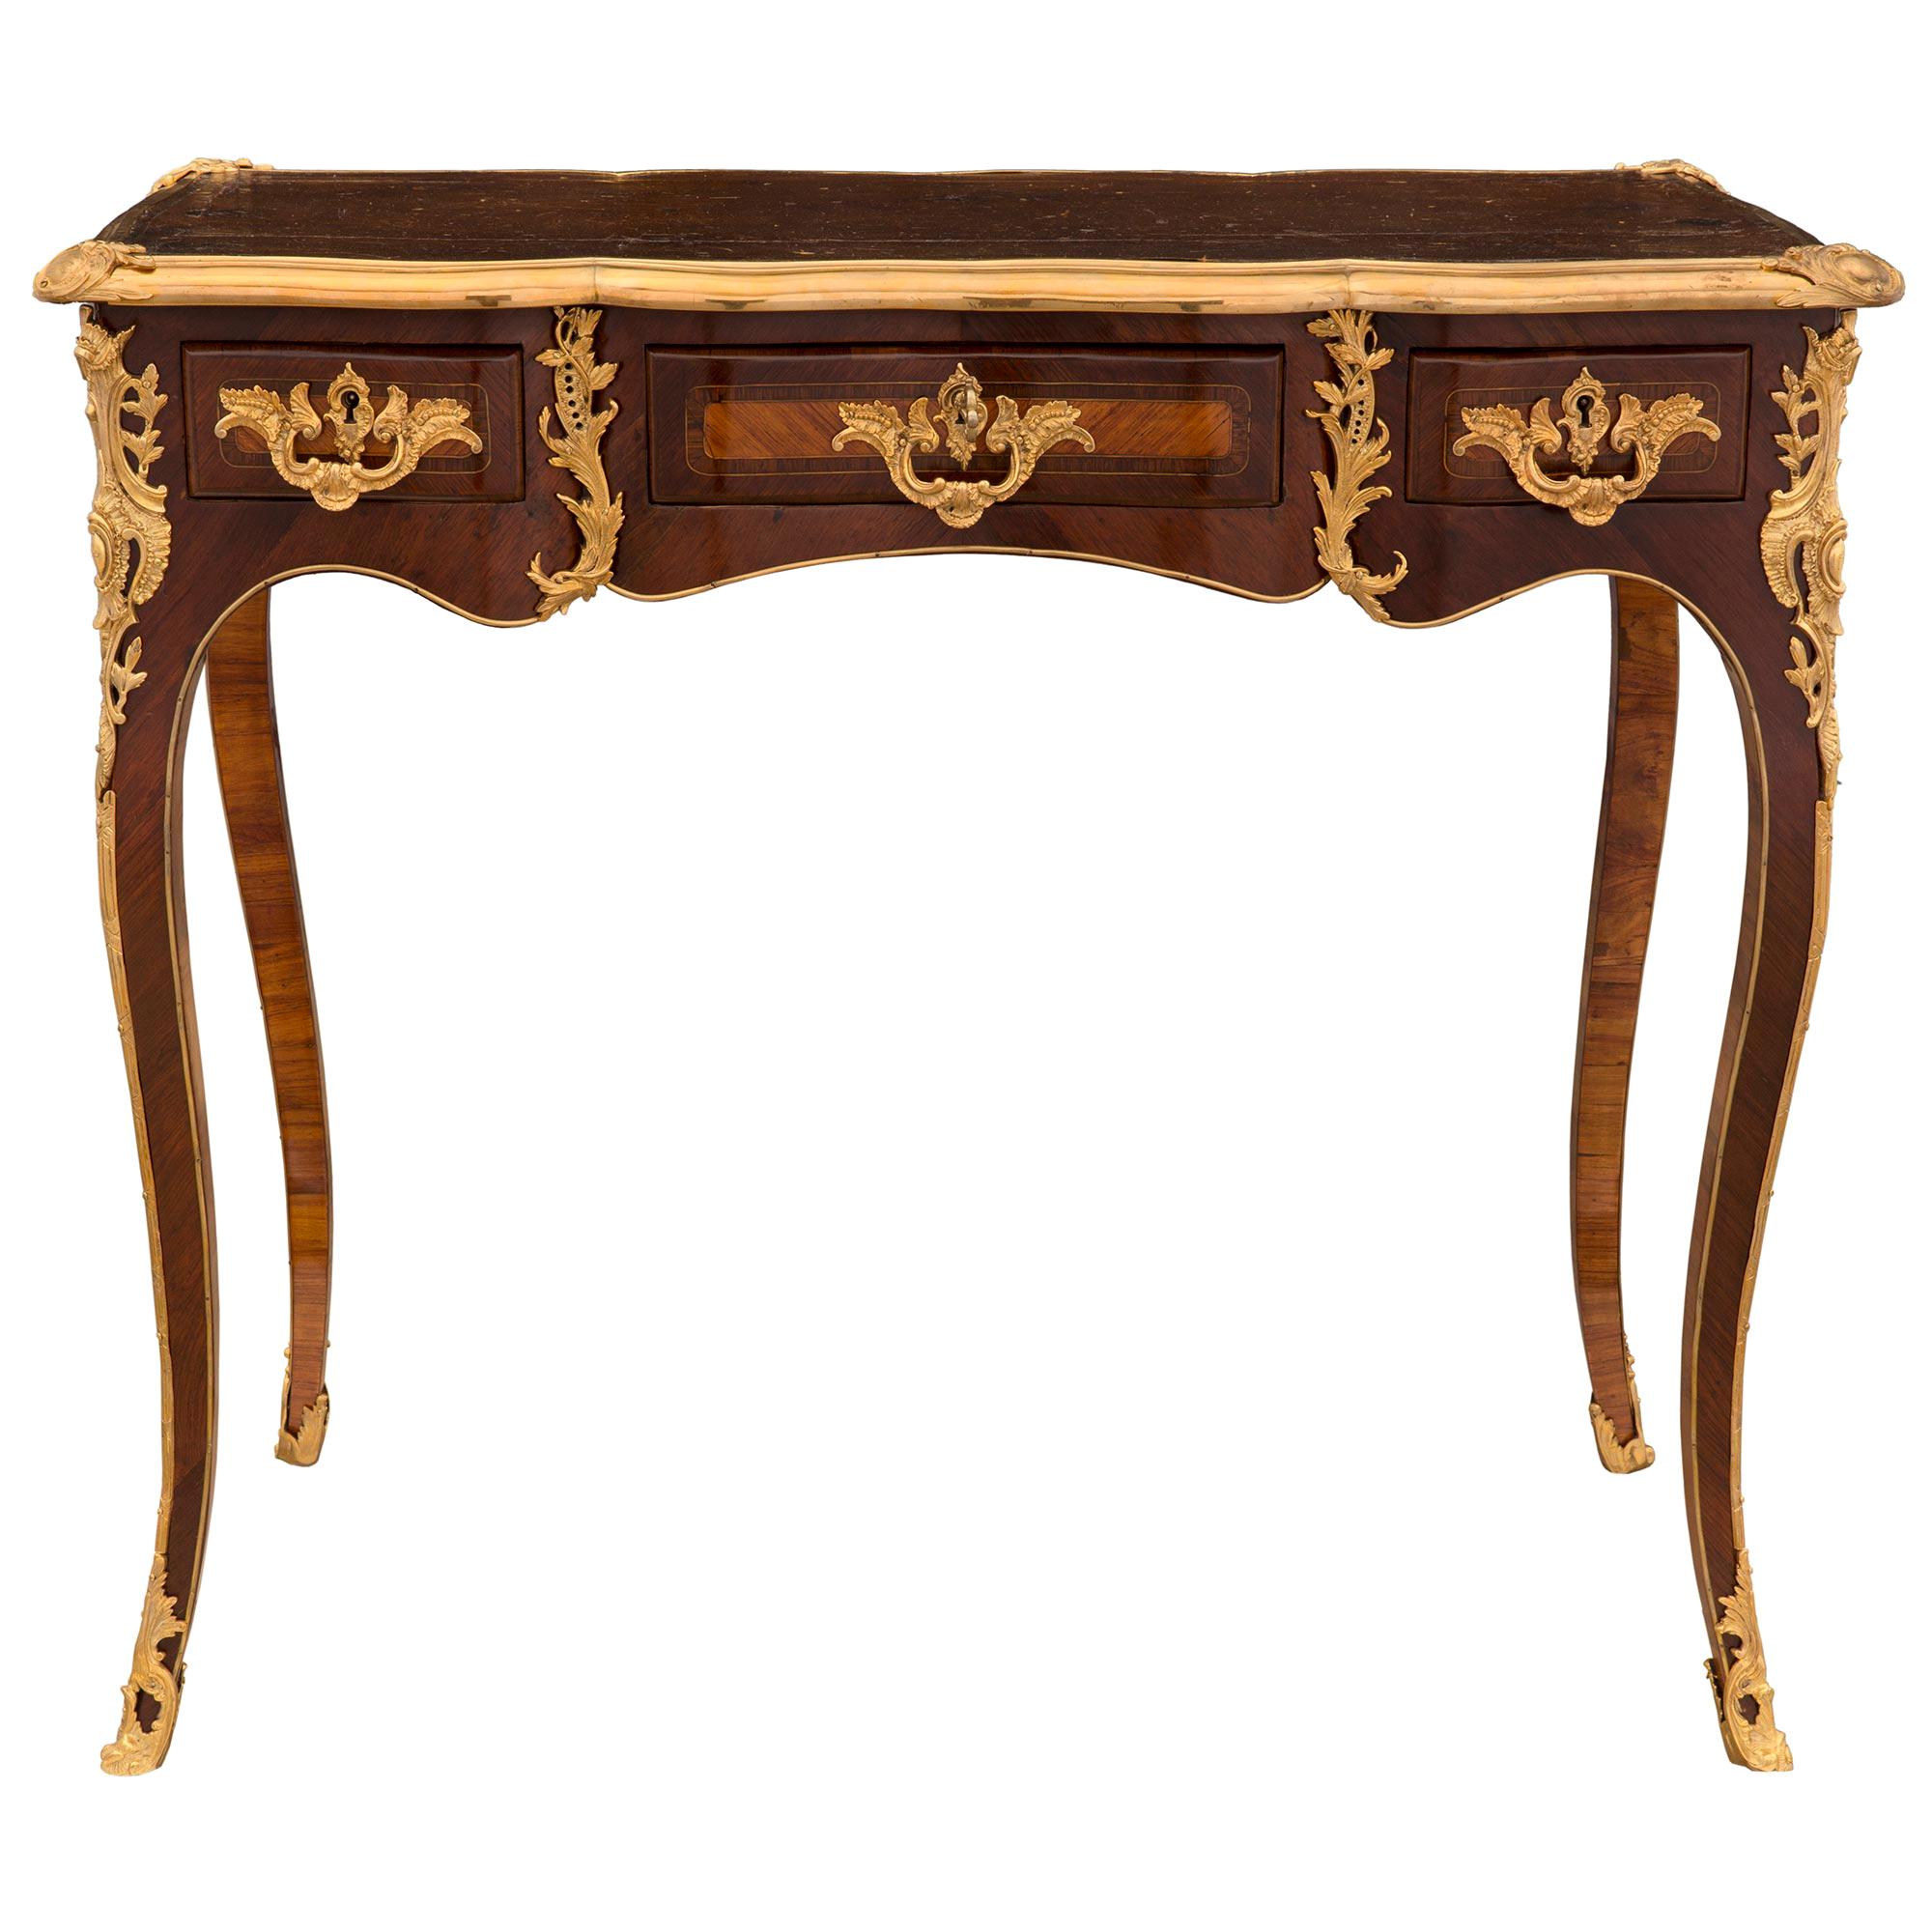 French 18th Century Louis XV Period French Desk in Kingwood and Tulipwood